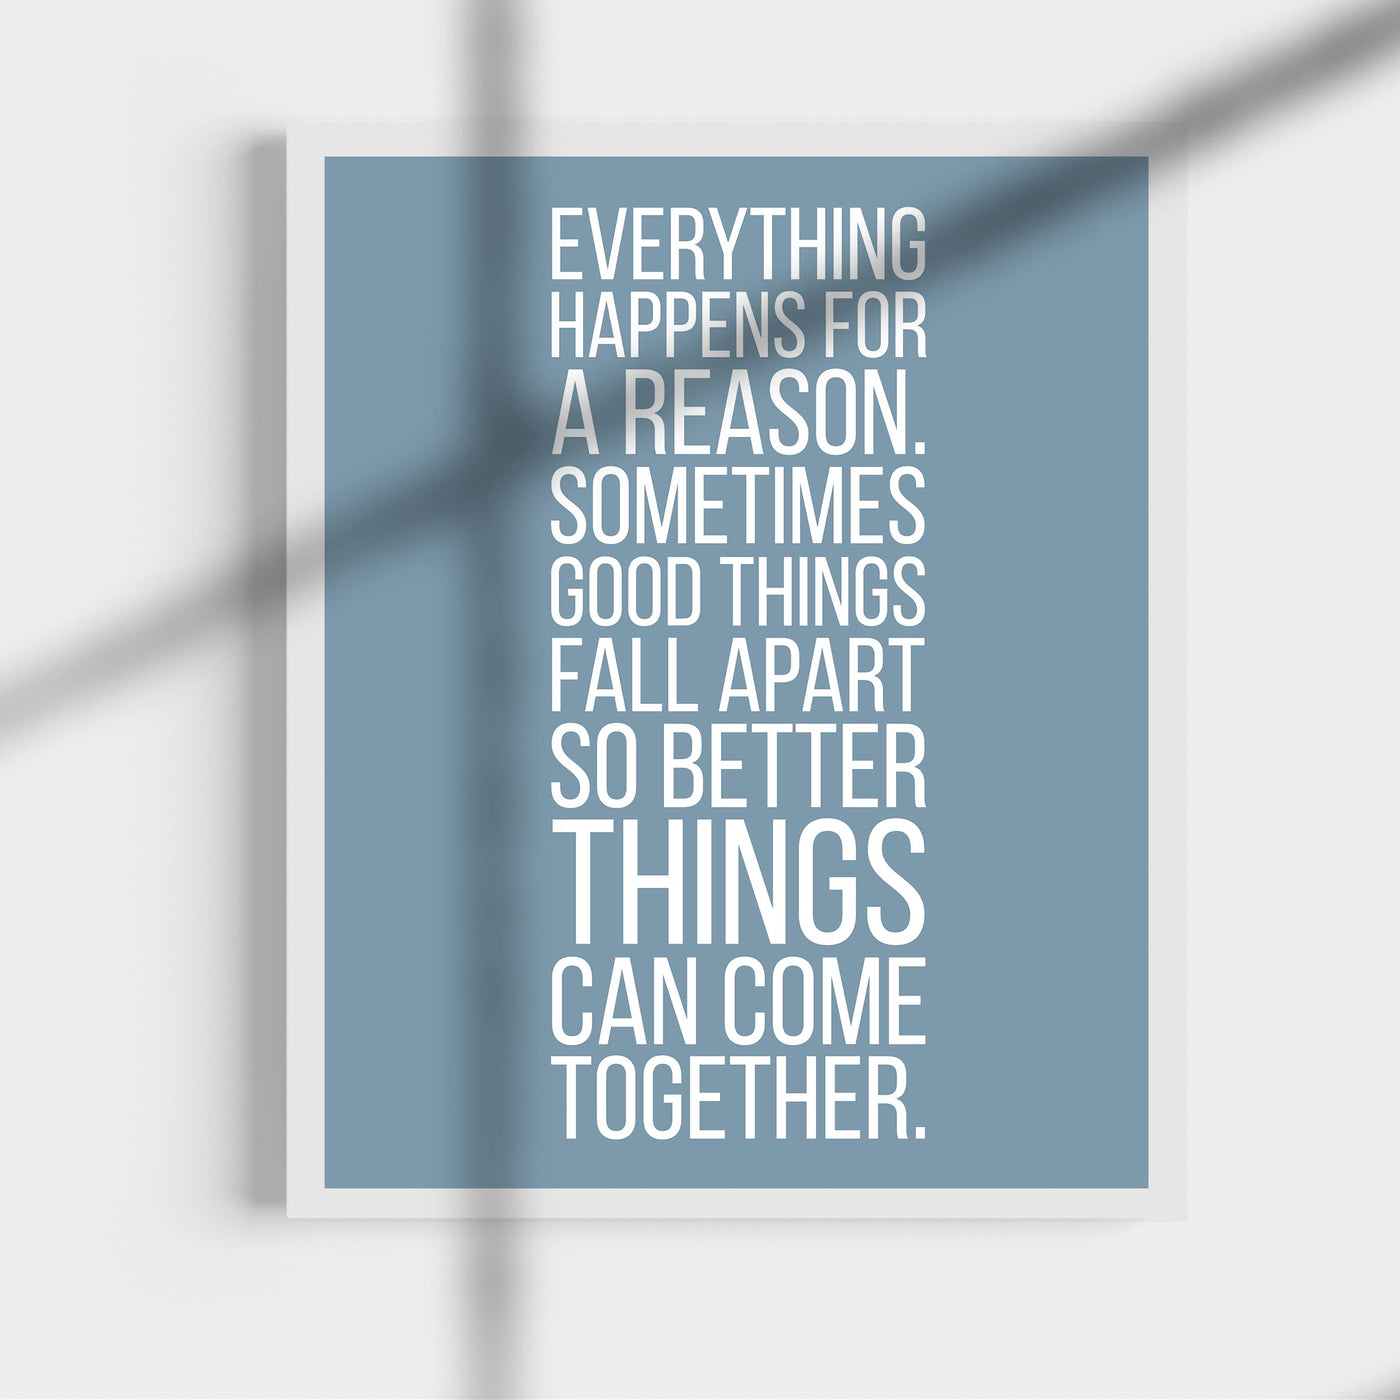 Everything Happens For a Reason-BLUE- Inspirational Quotes Wall Art Sign -11 x 14" Modern Typography Print -Ready to Frame. Motivational Decor for Home-Office-Classroom-Man Cave. Great Life Lesson!